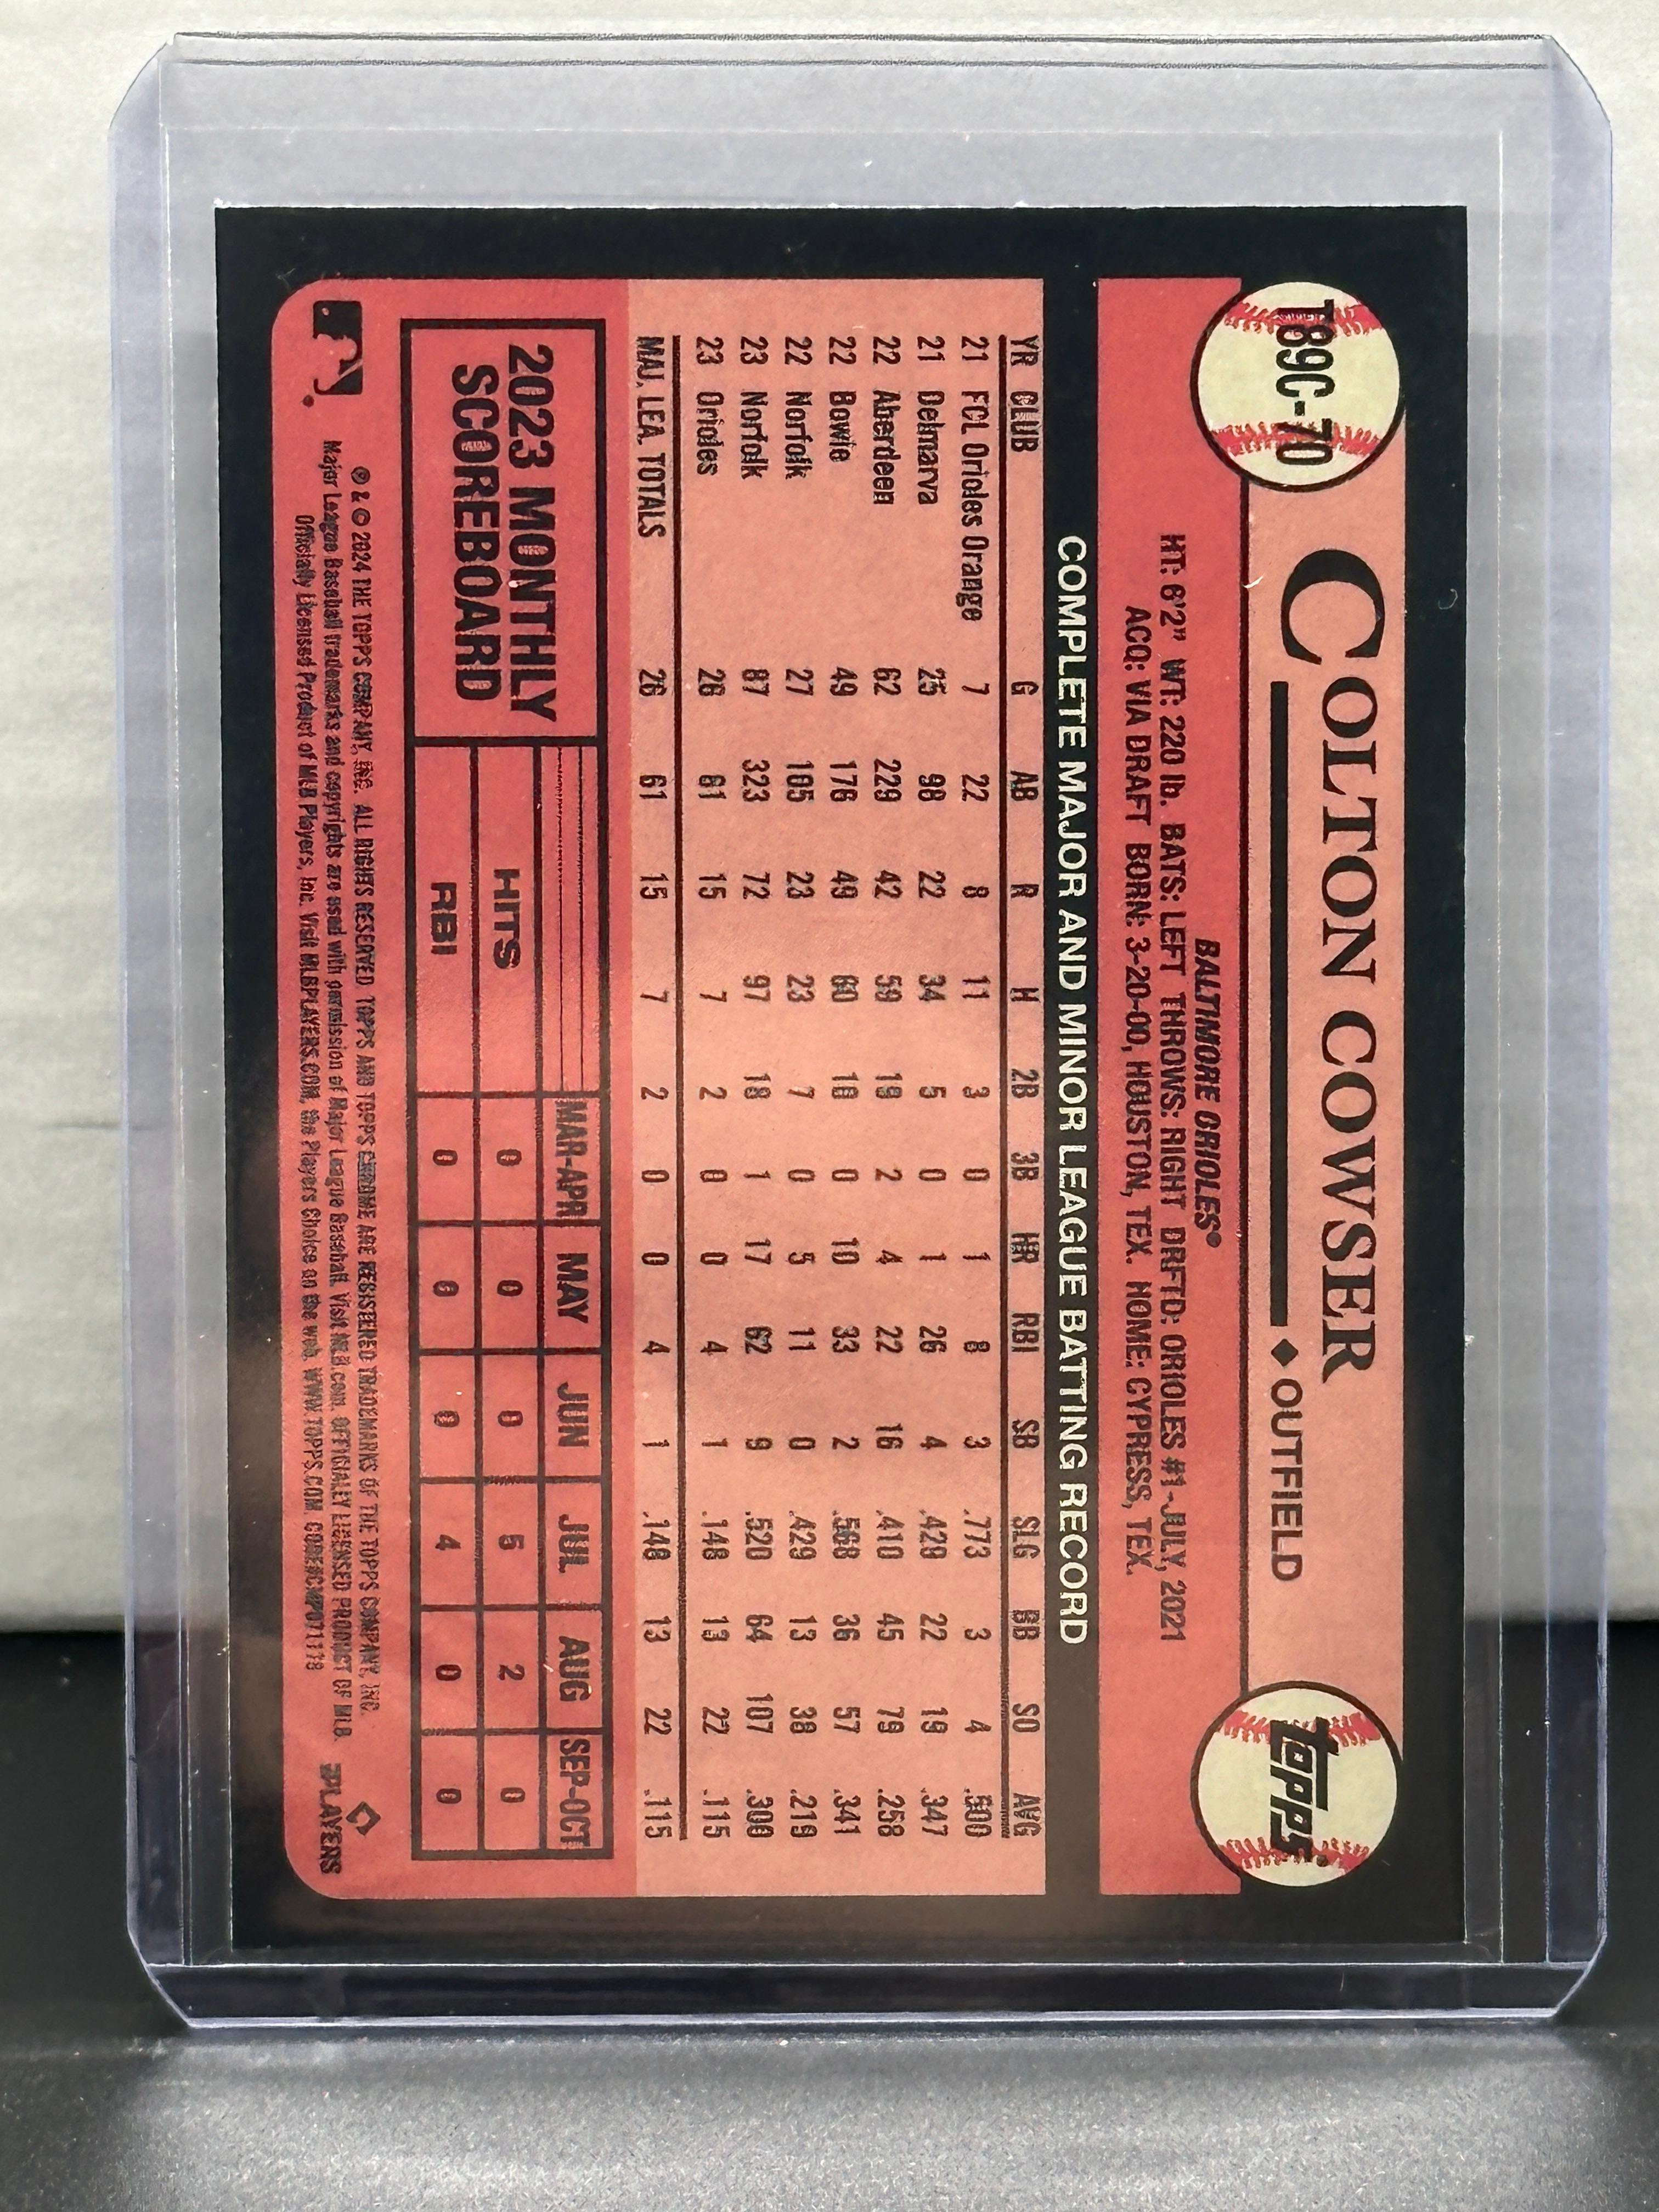 Colton Cowser 2024 Topps Chrome 1989 Design Mojo Refractor Rookie RC Insert #T89C-70